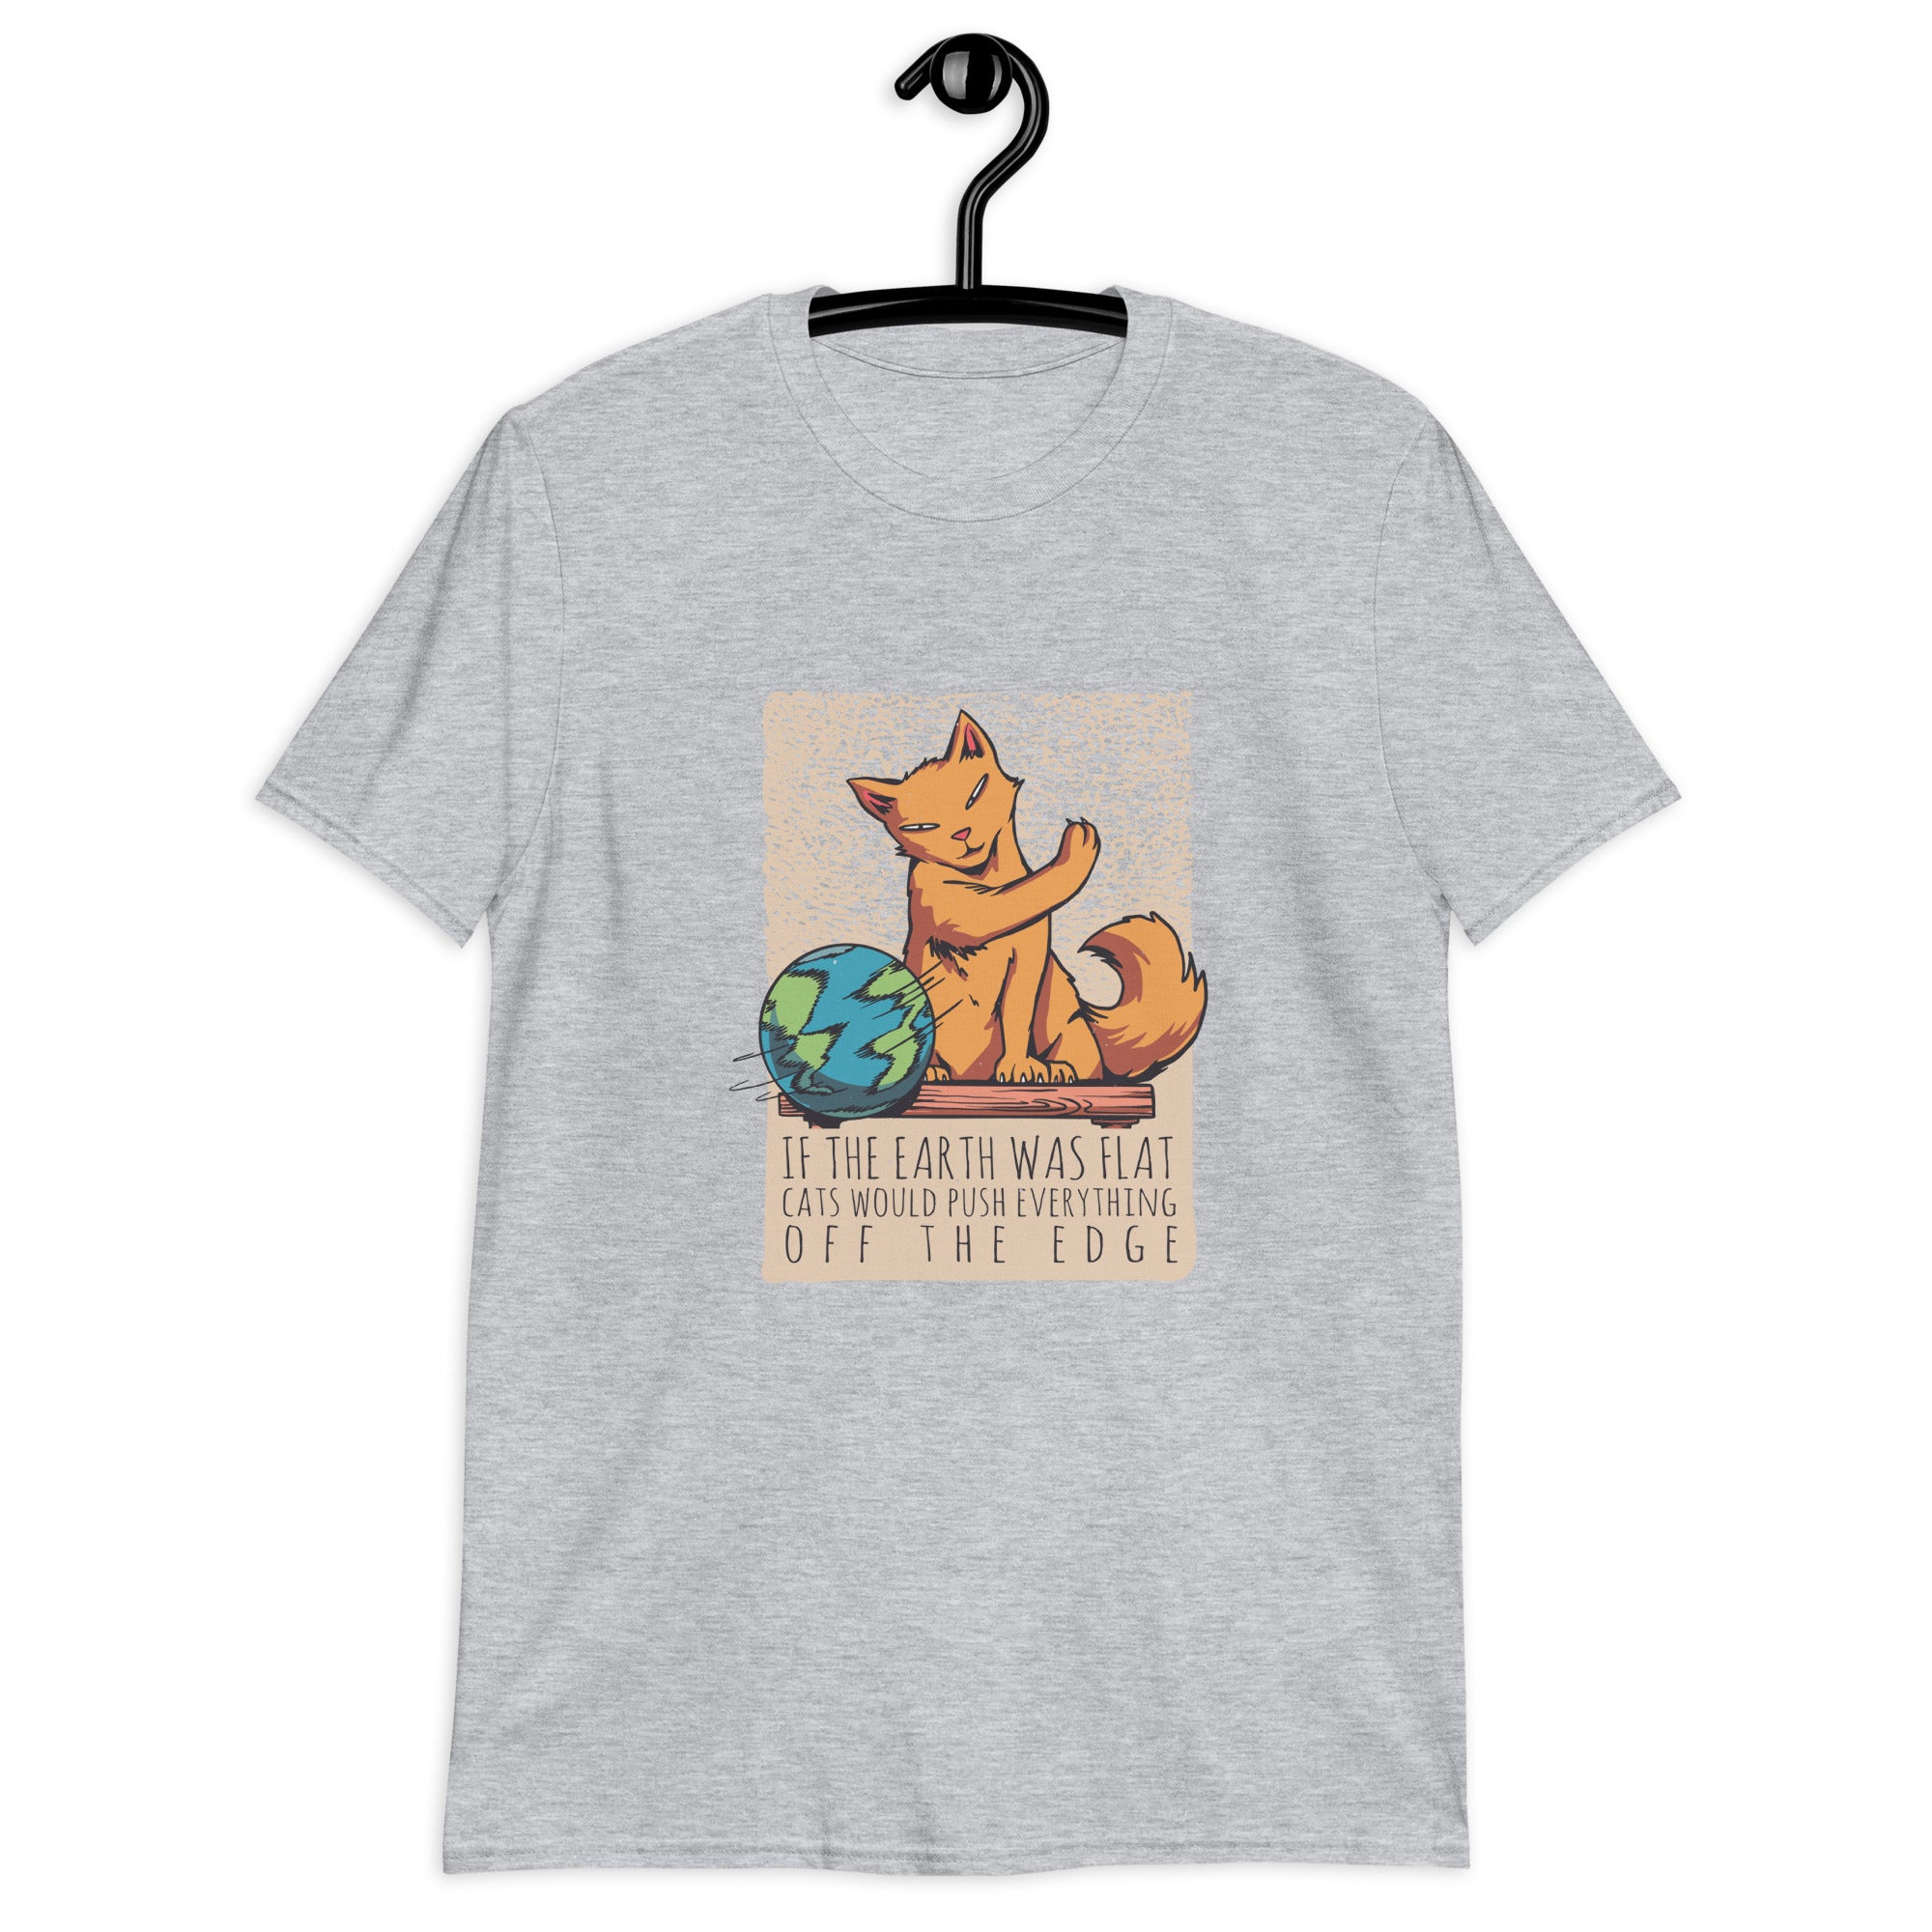 Short-Sleeve Unisex T-Shirt | If the earth was flat, cats would push everything off the edge